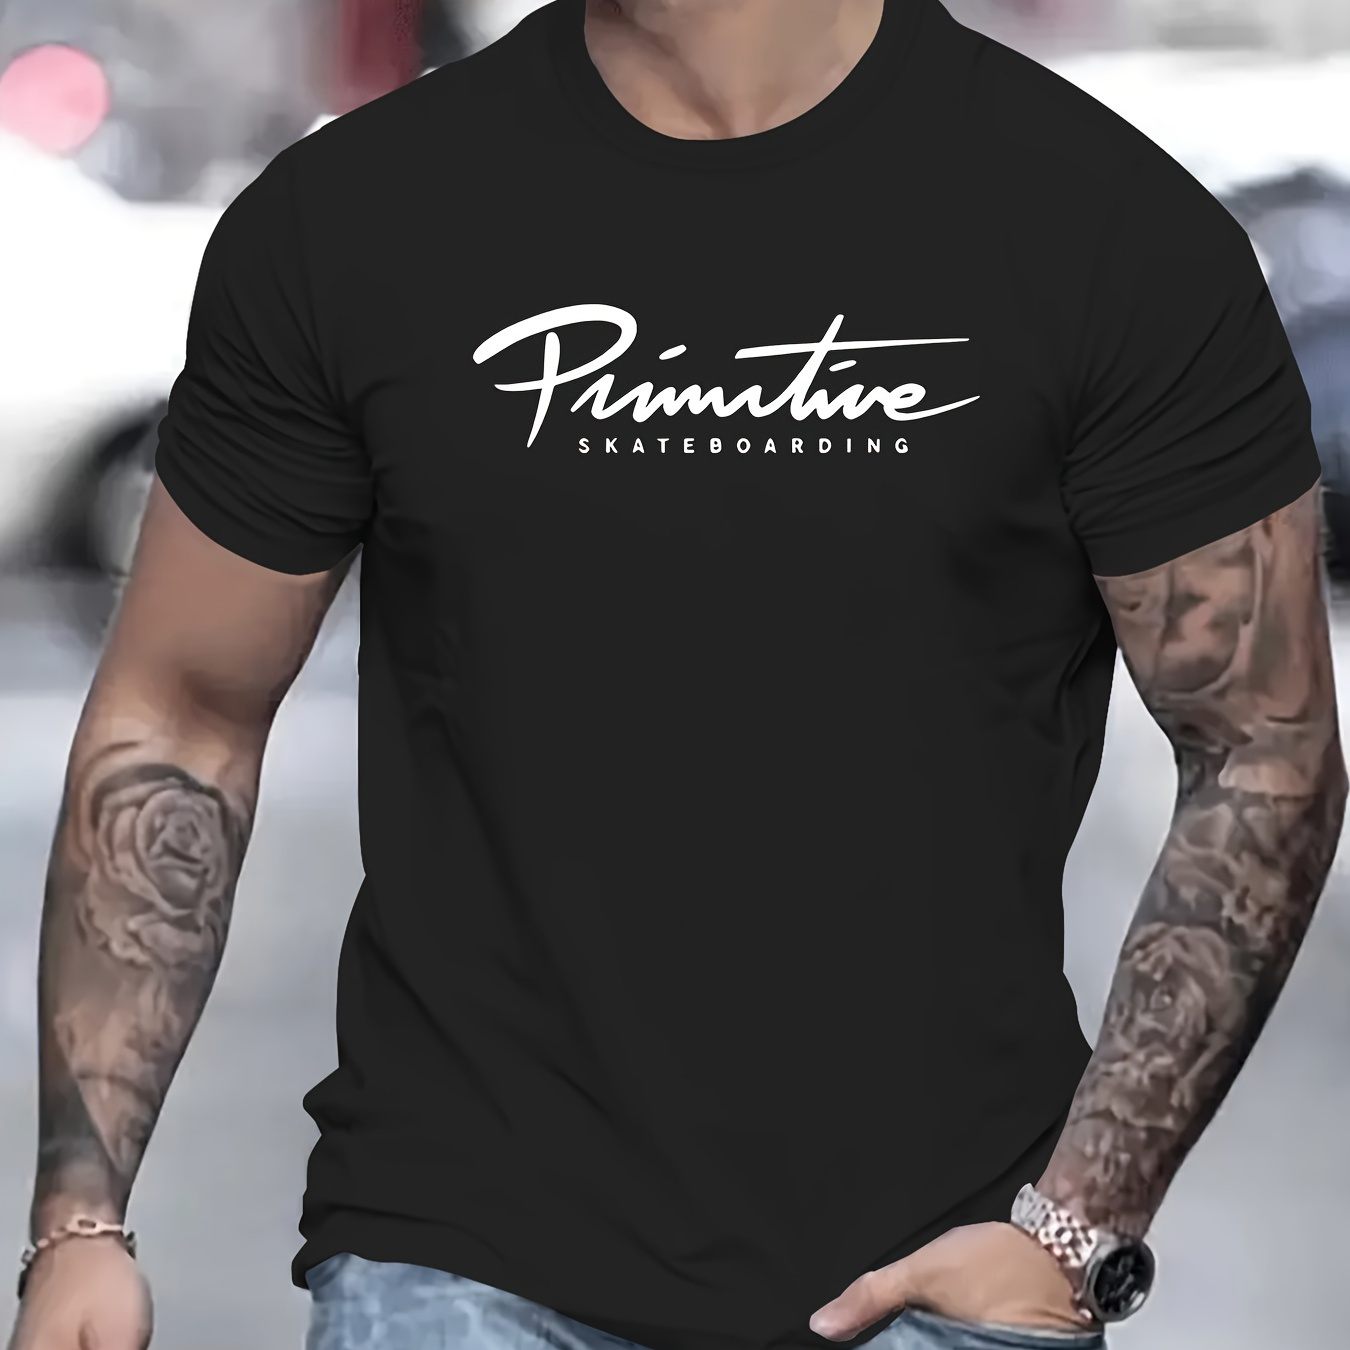 

" Creative Print Casual Novelty T-shirt For Men, Short Sleeve Summer& Spring Top, Comfort Fit, Stylish Streetwear Crew Neck Tee For Daily Wear